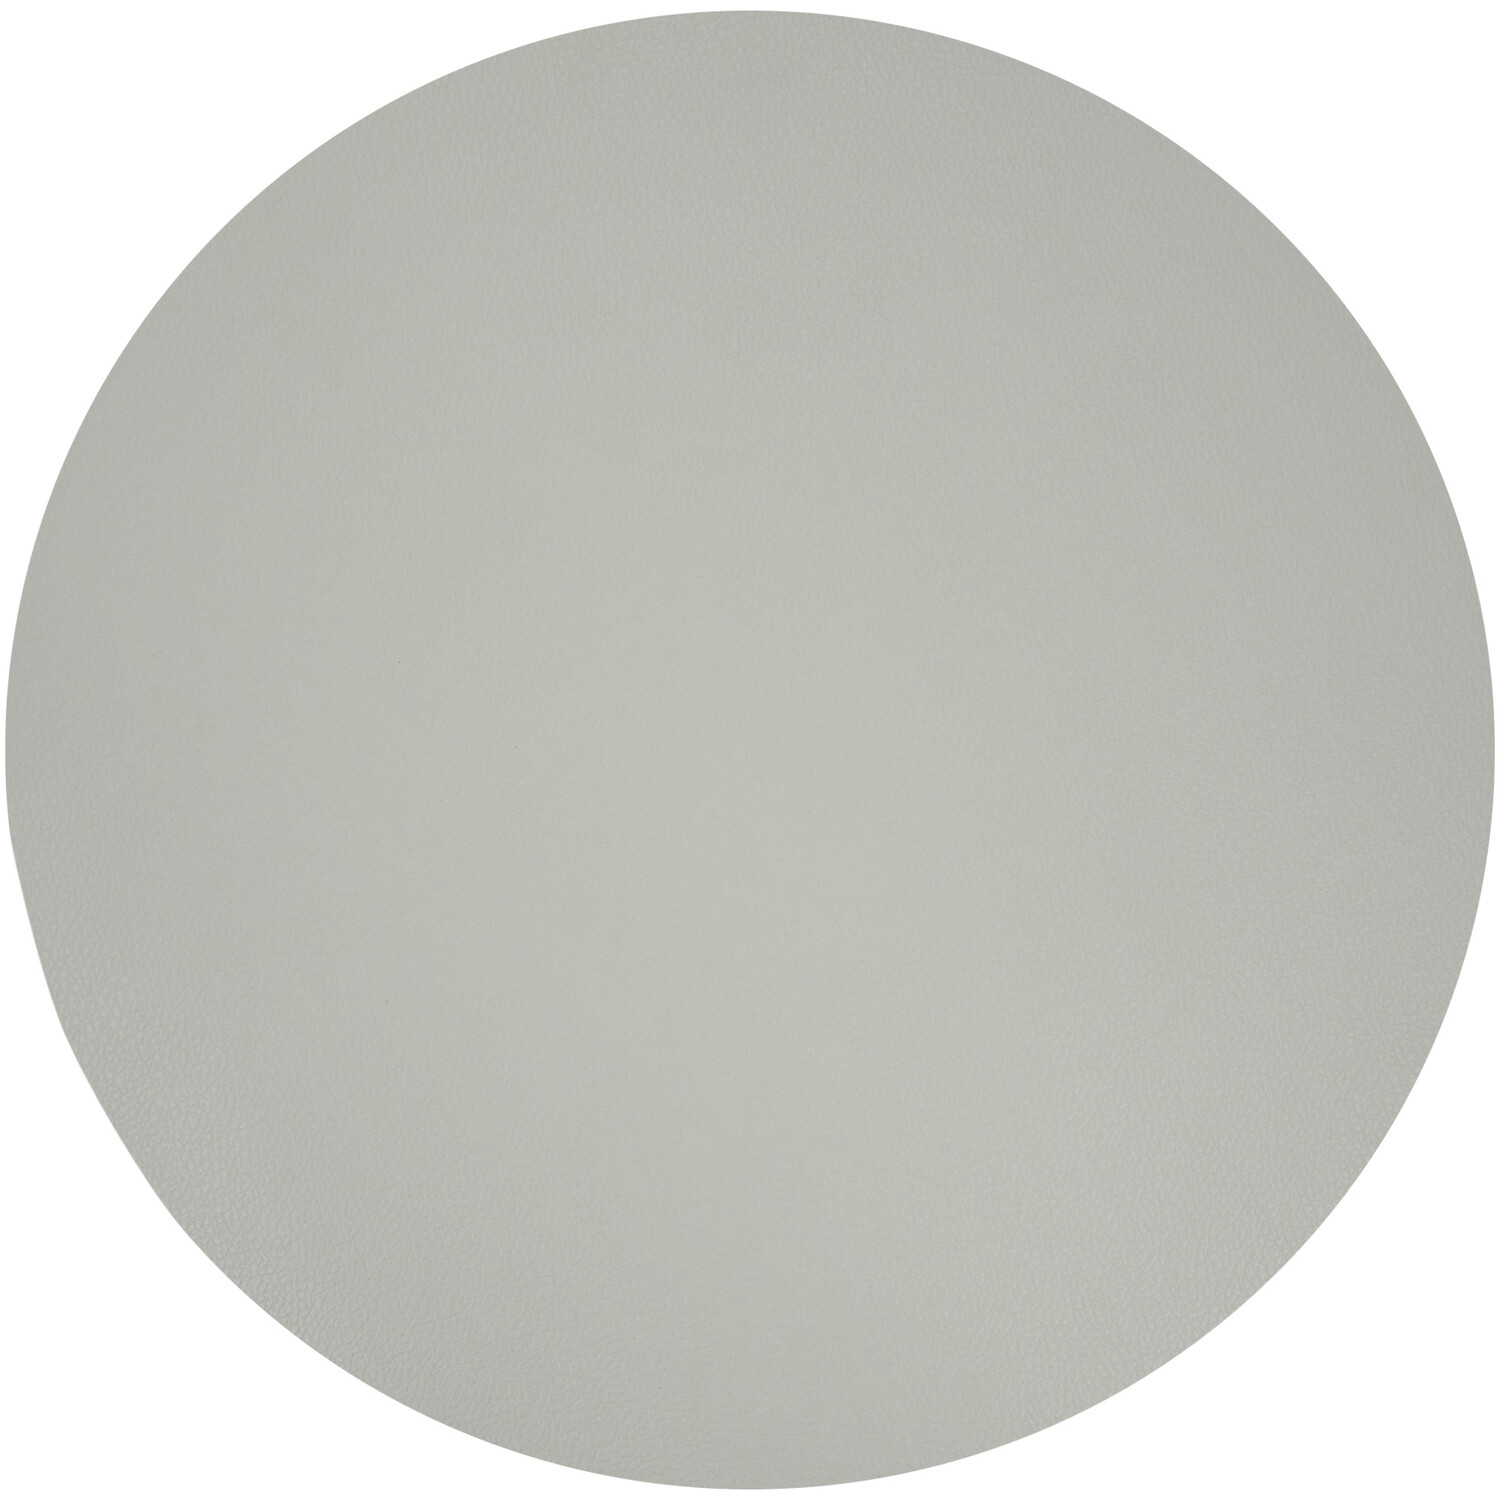 Set of 2 Round Placemats - Grey Image 6